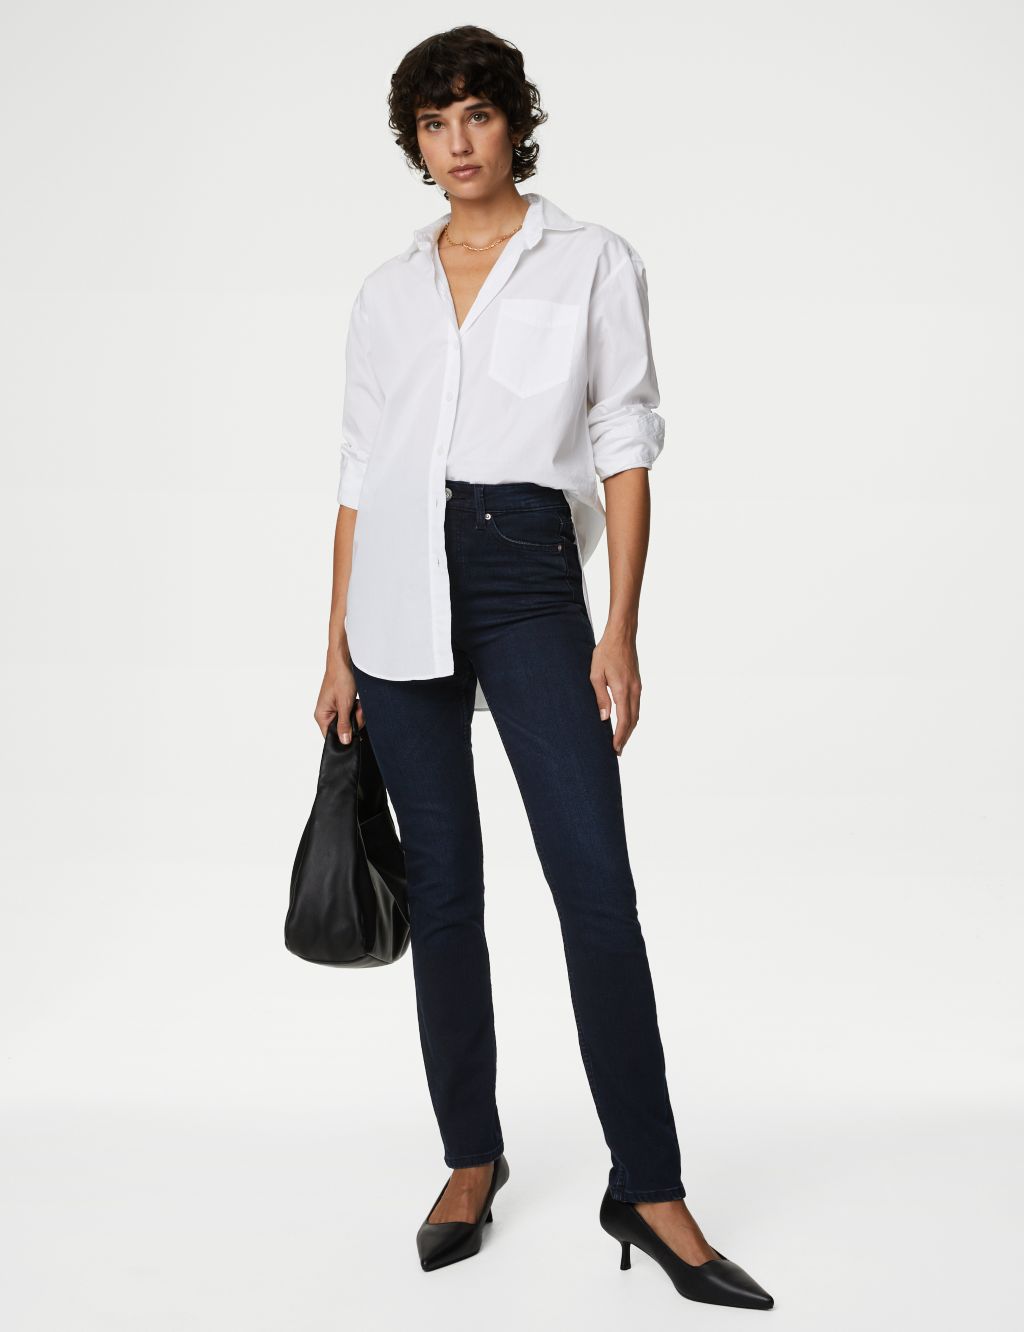 Lily Slim Fit Jeans with Stretch image 2